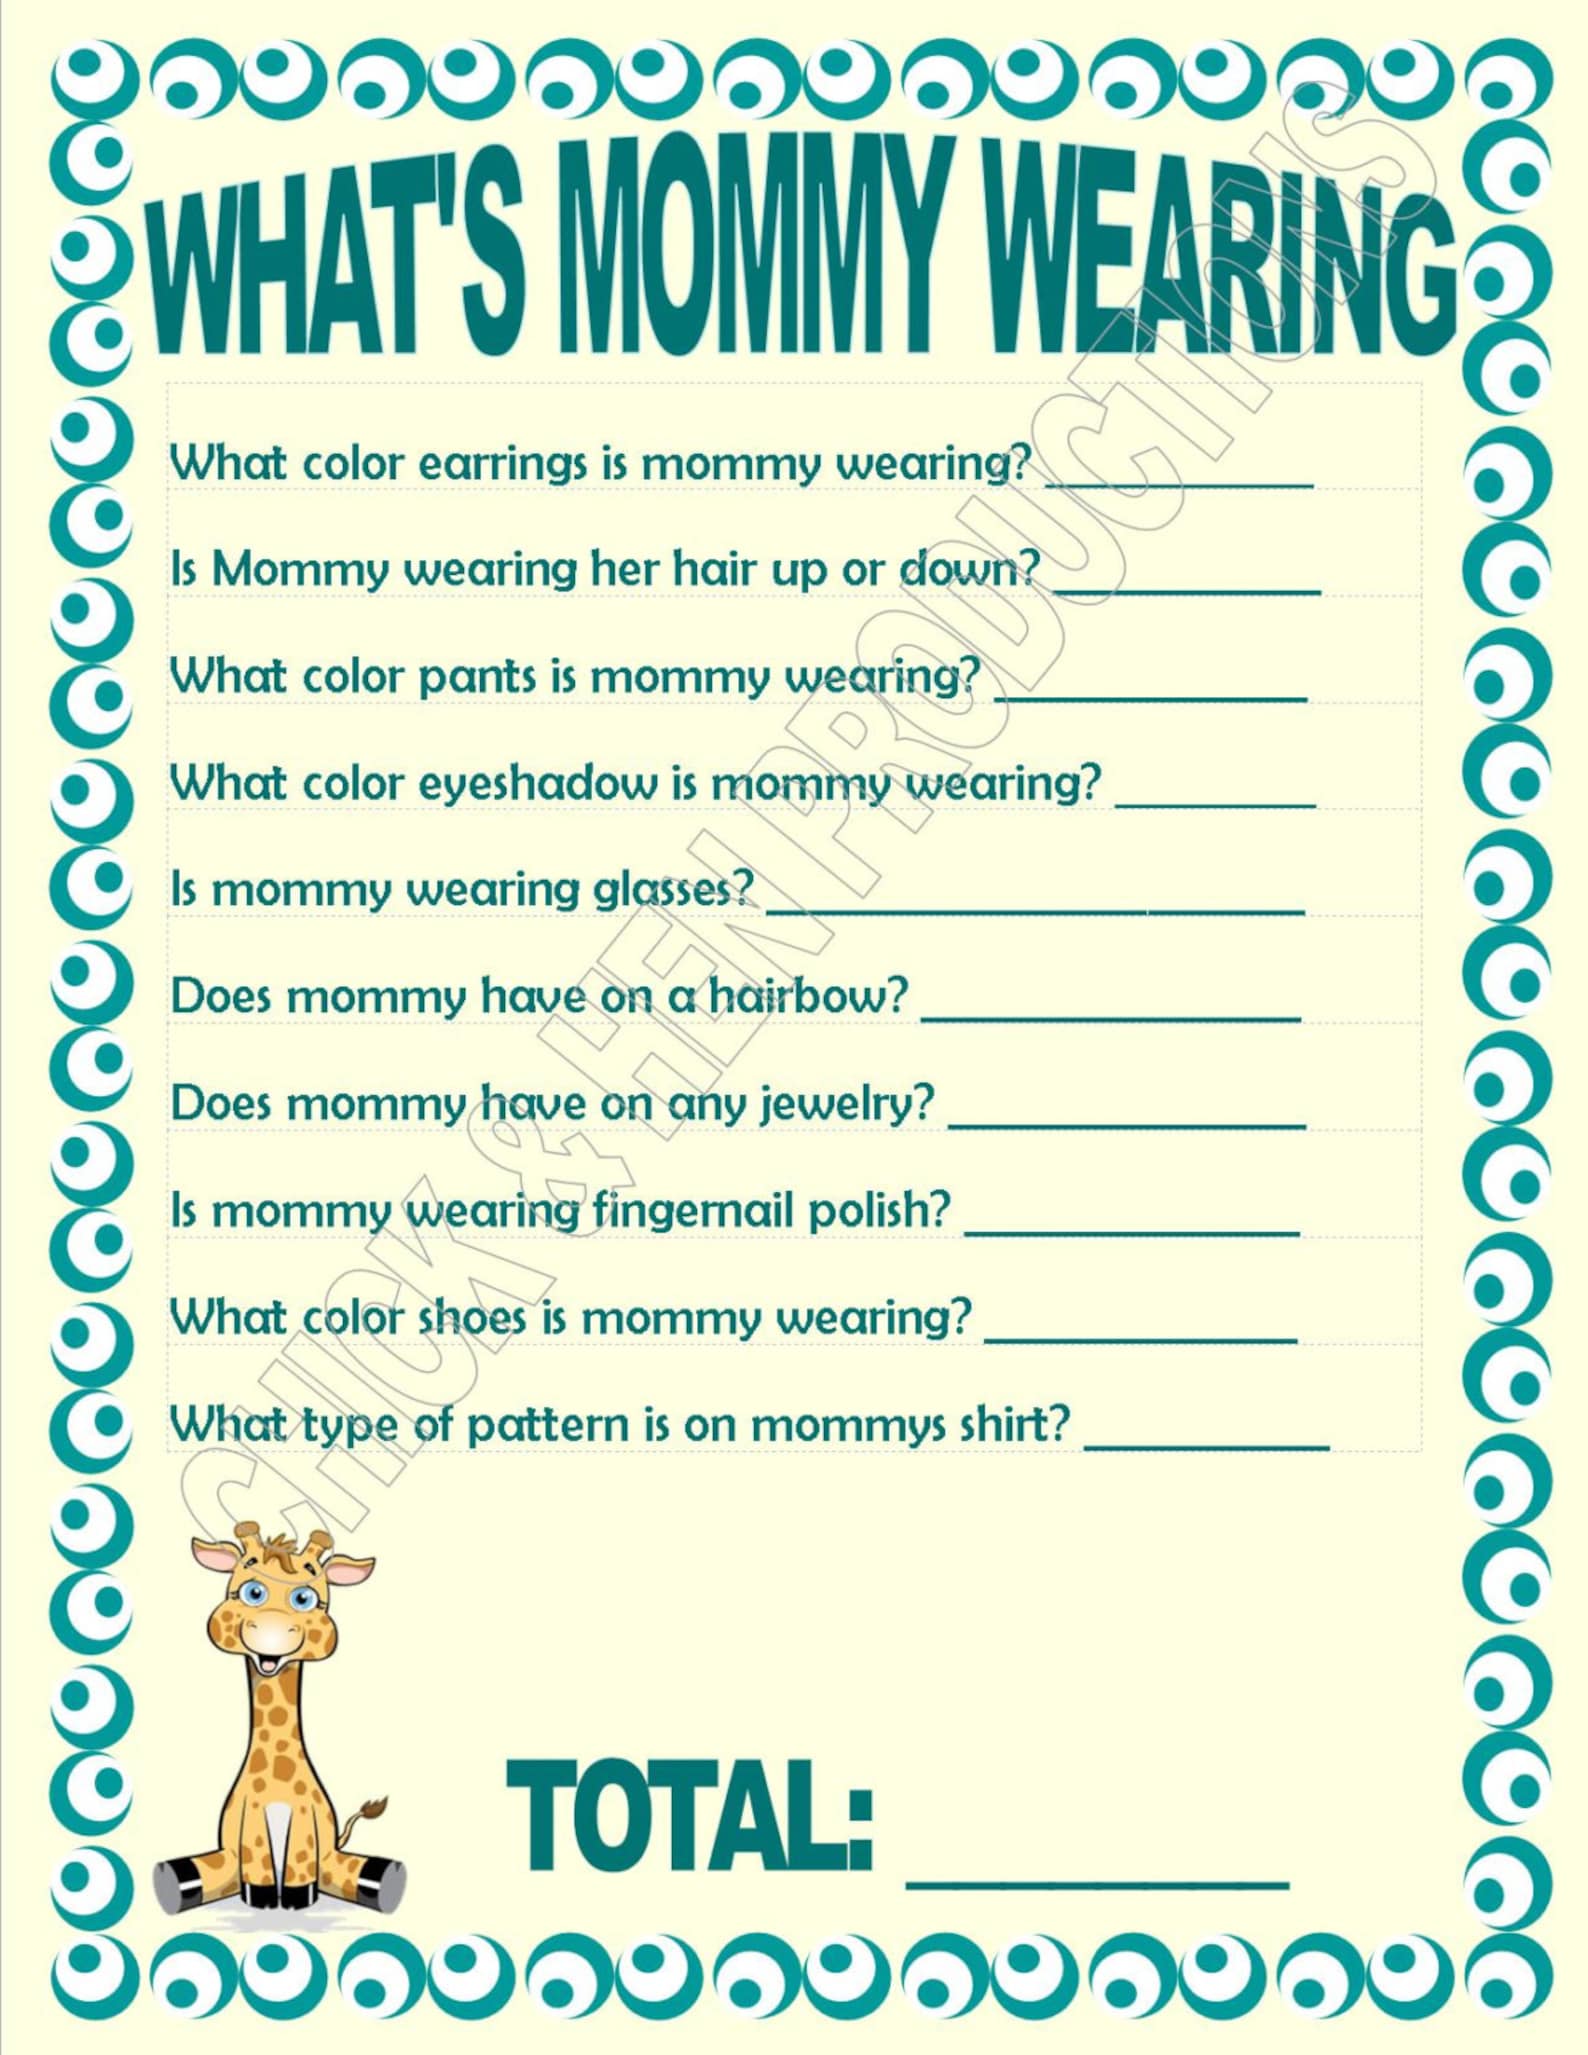 what-s-mommy-wearing-baby-shower-game-instant-download-etsy